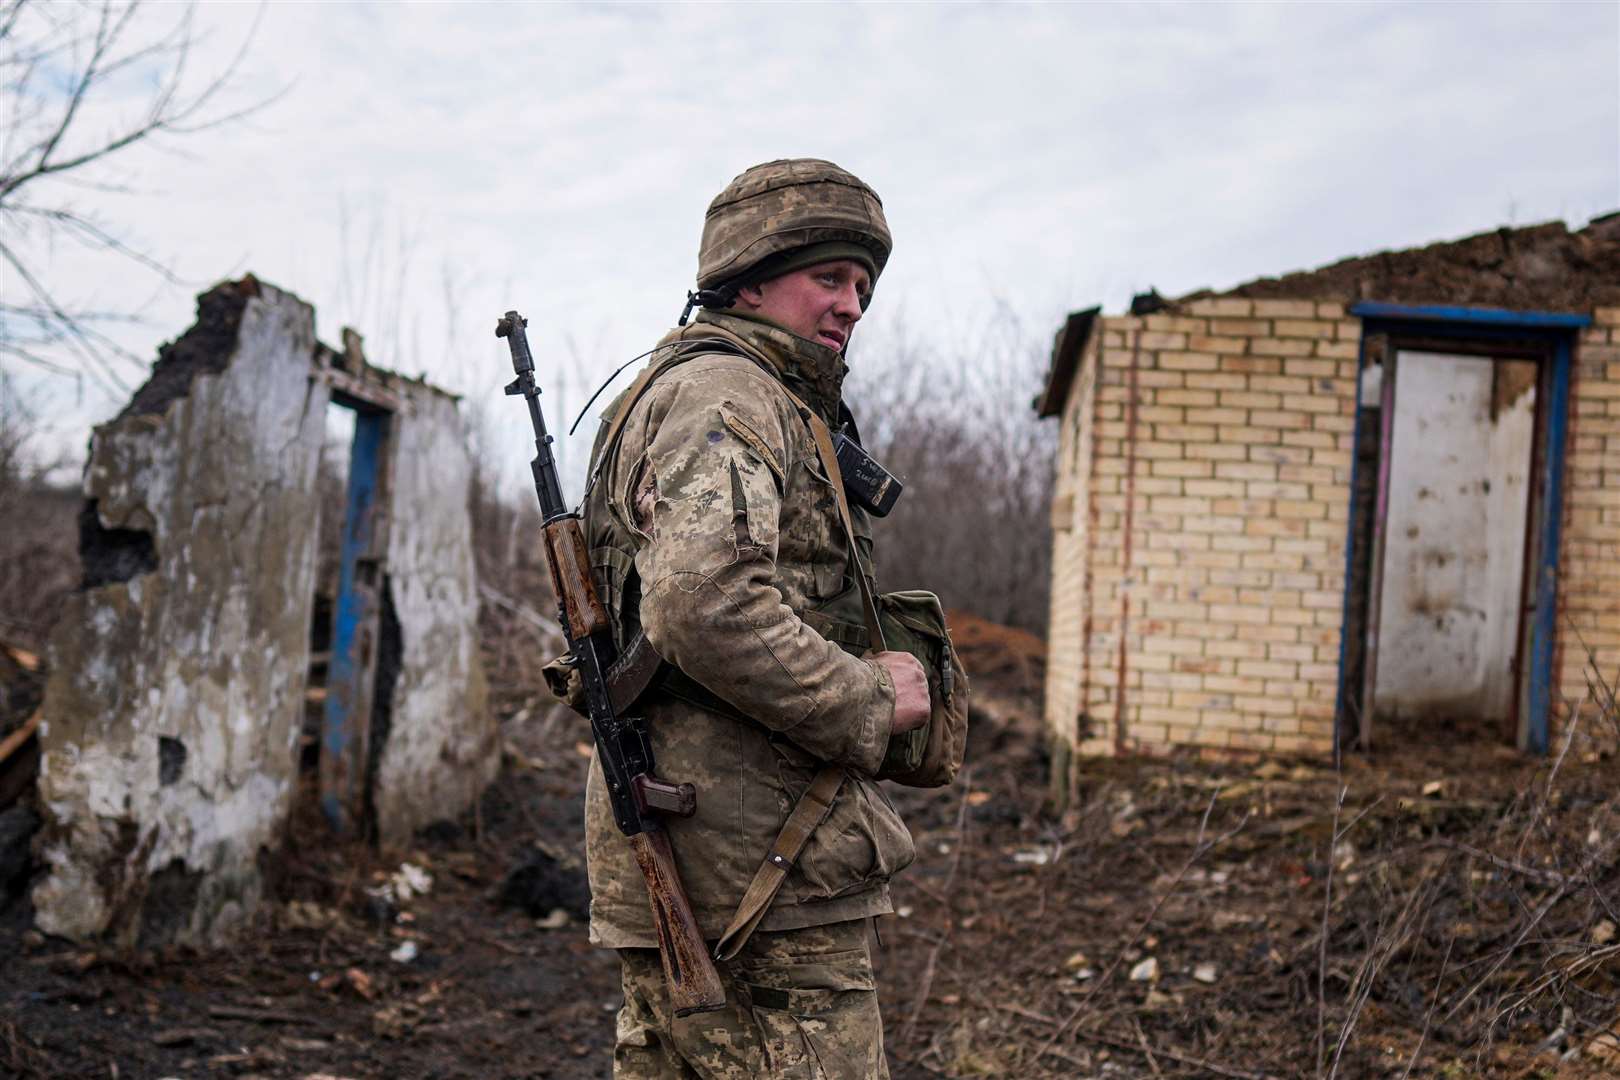 The invasion of Ukraine has sent shockwaves around the world. Picture: PA News